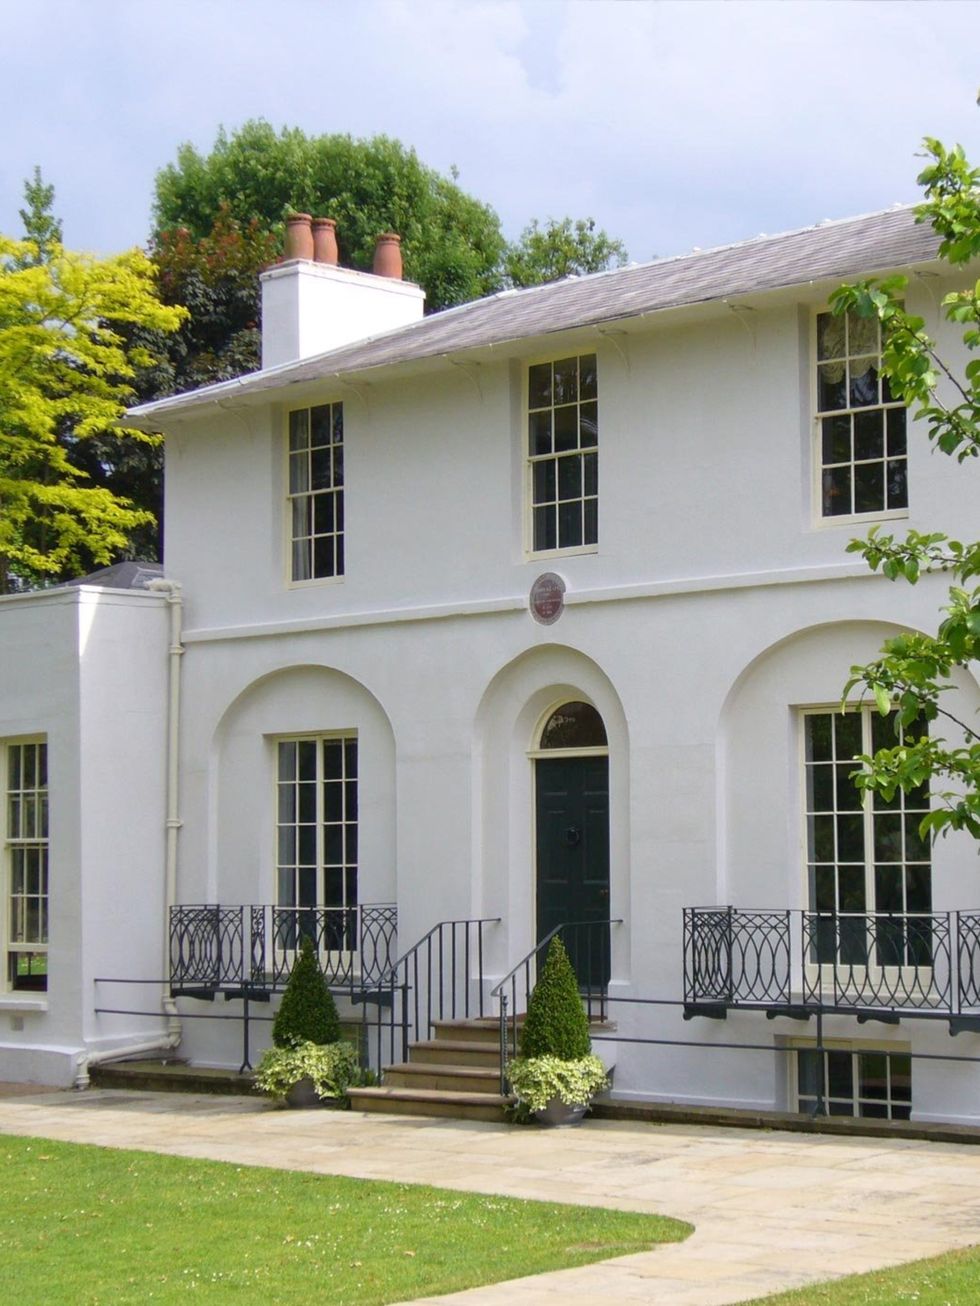 &lt;p&gt;&lt;strong&gt;CULTURE: Keats Festival &lt;/strong&gt;&lt;/p&gt;&lt;p&gt;This Saturday, Keats House, former home to the famous poet, will play host to the Keats Festival, celebrating 200 years since he found his voice.&lt;/p&gt;&lt;p&gt;With a ran